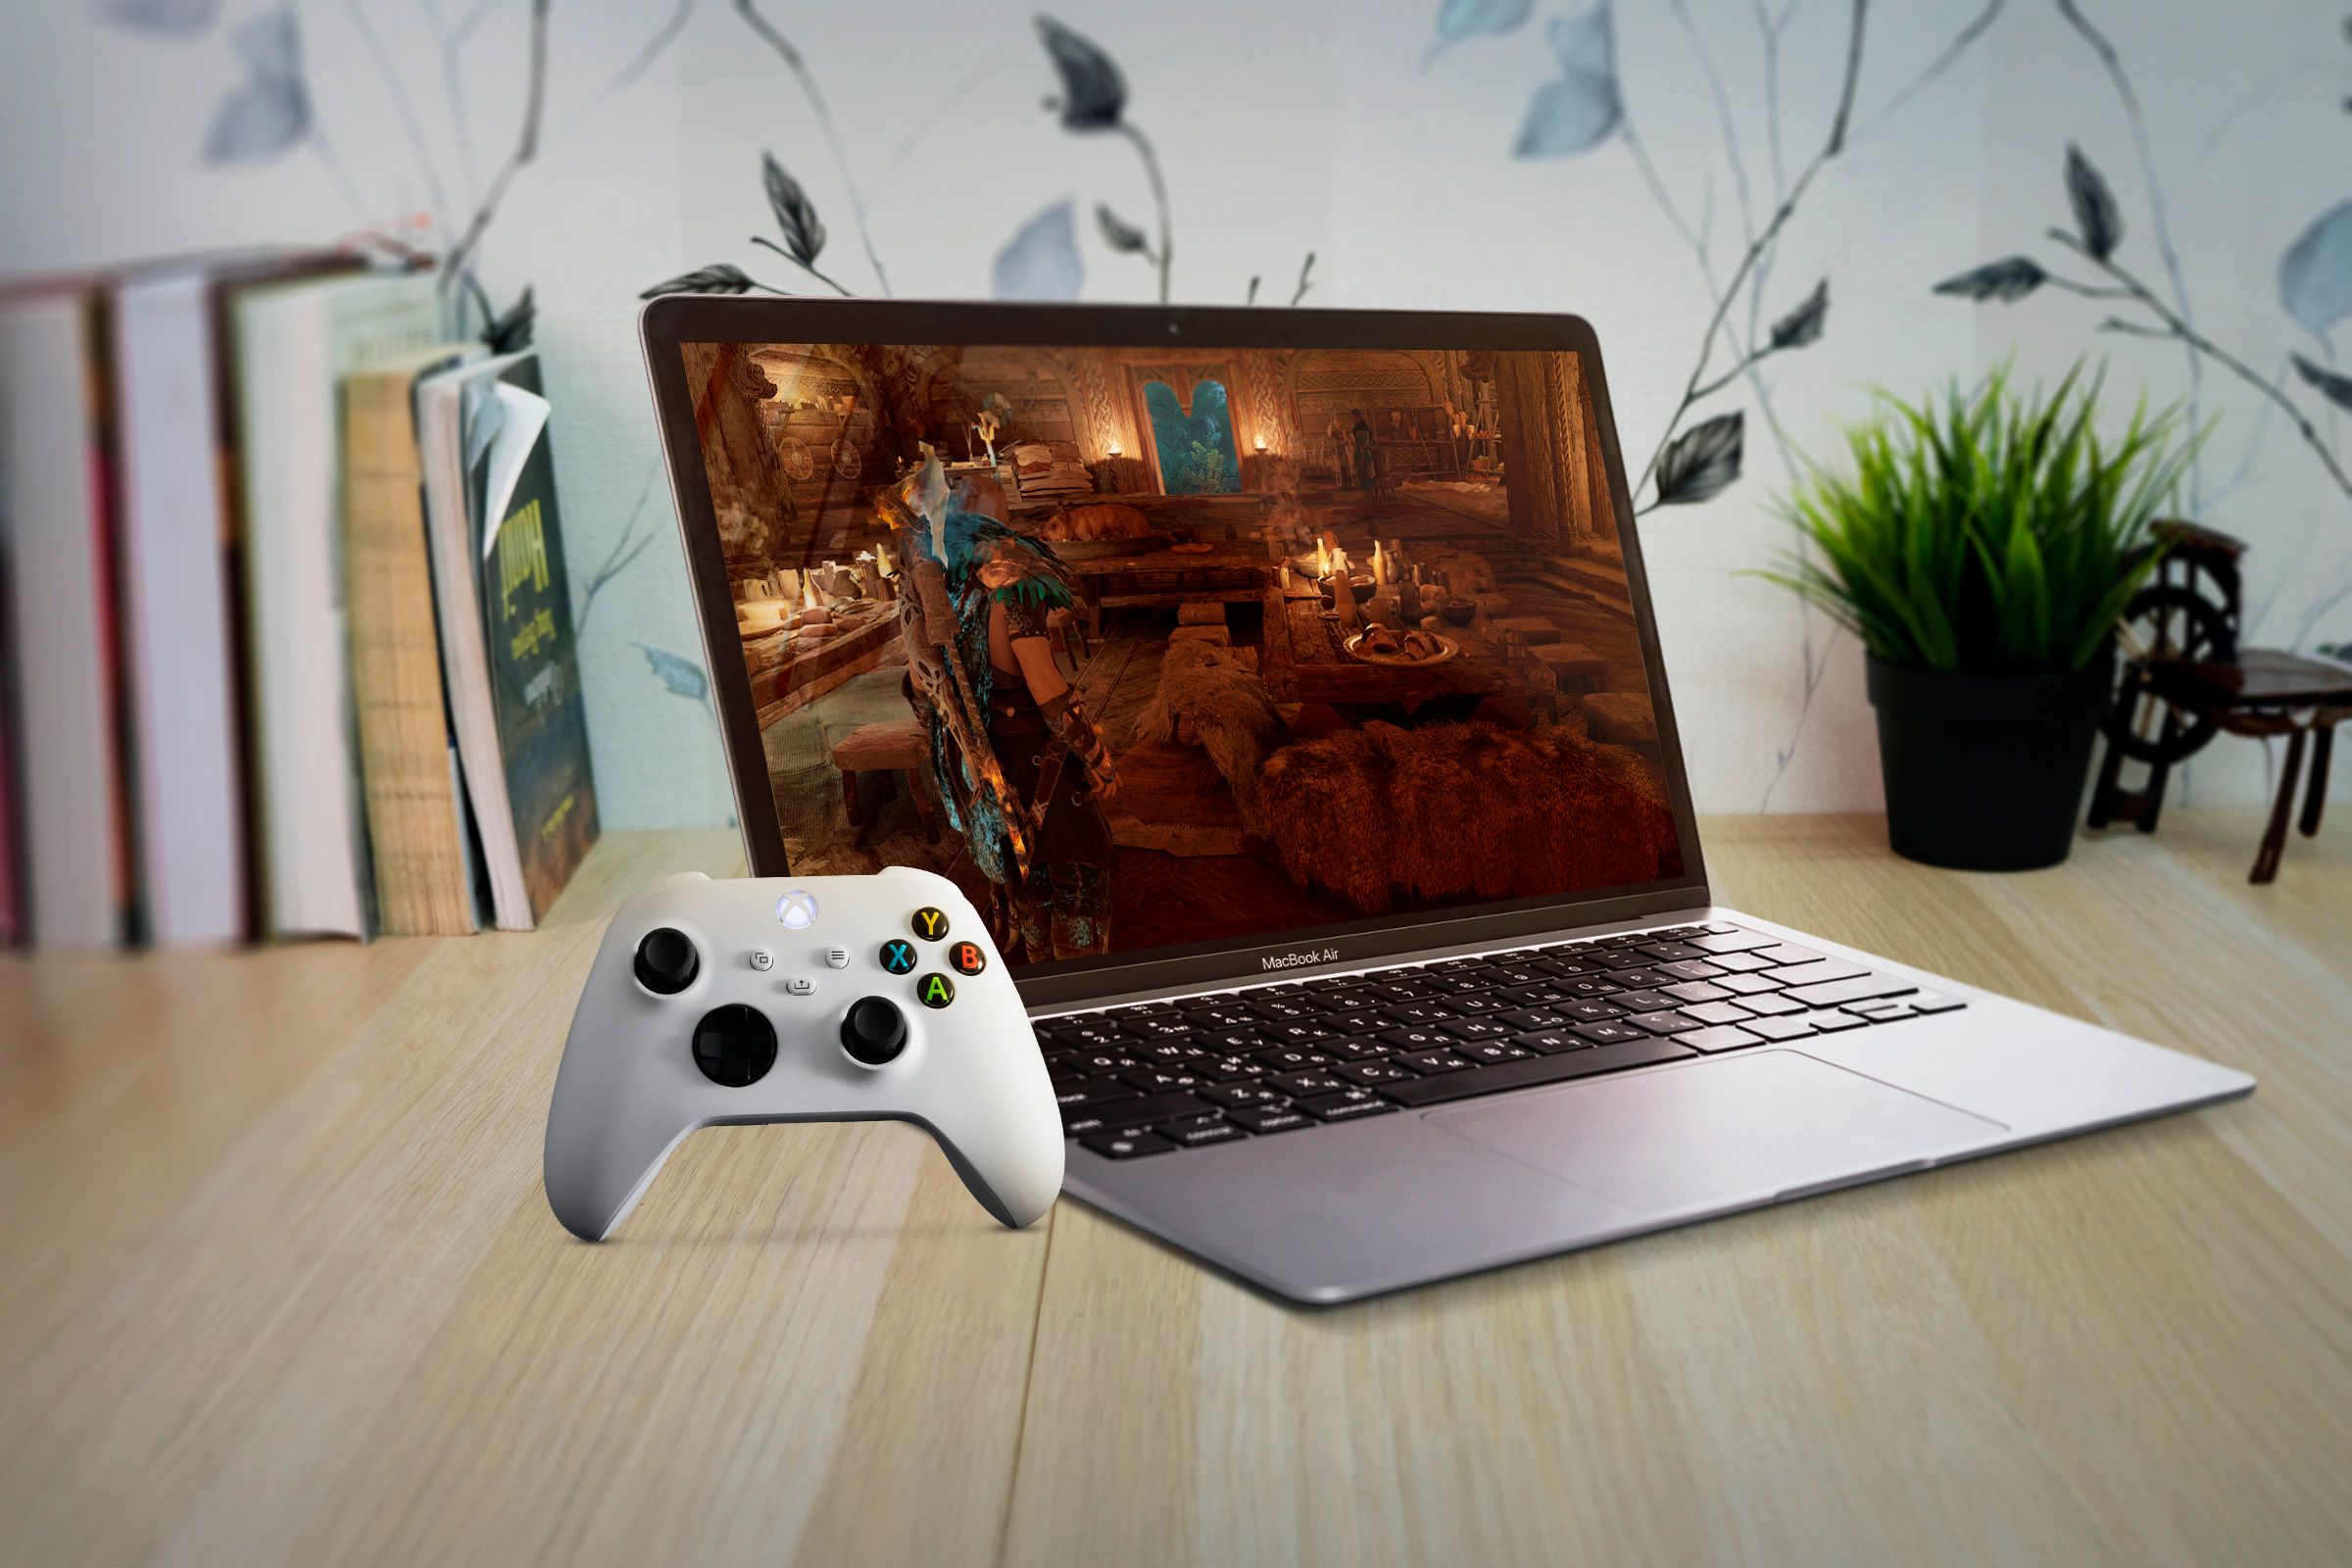 A MacBook Air under a wooden table with a game on the screen and an Xbox controller on the left